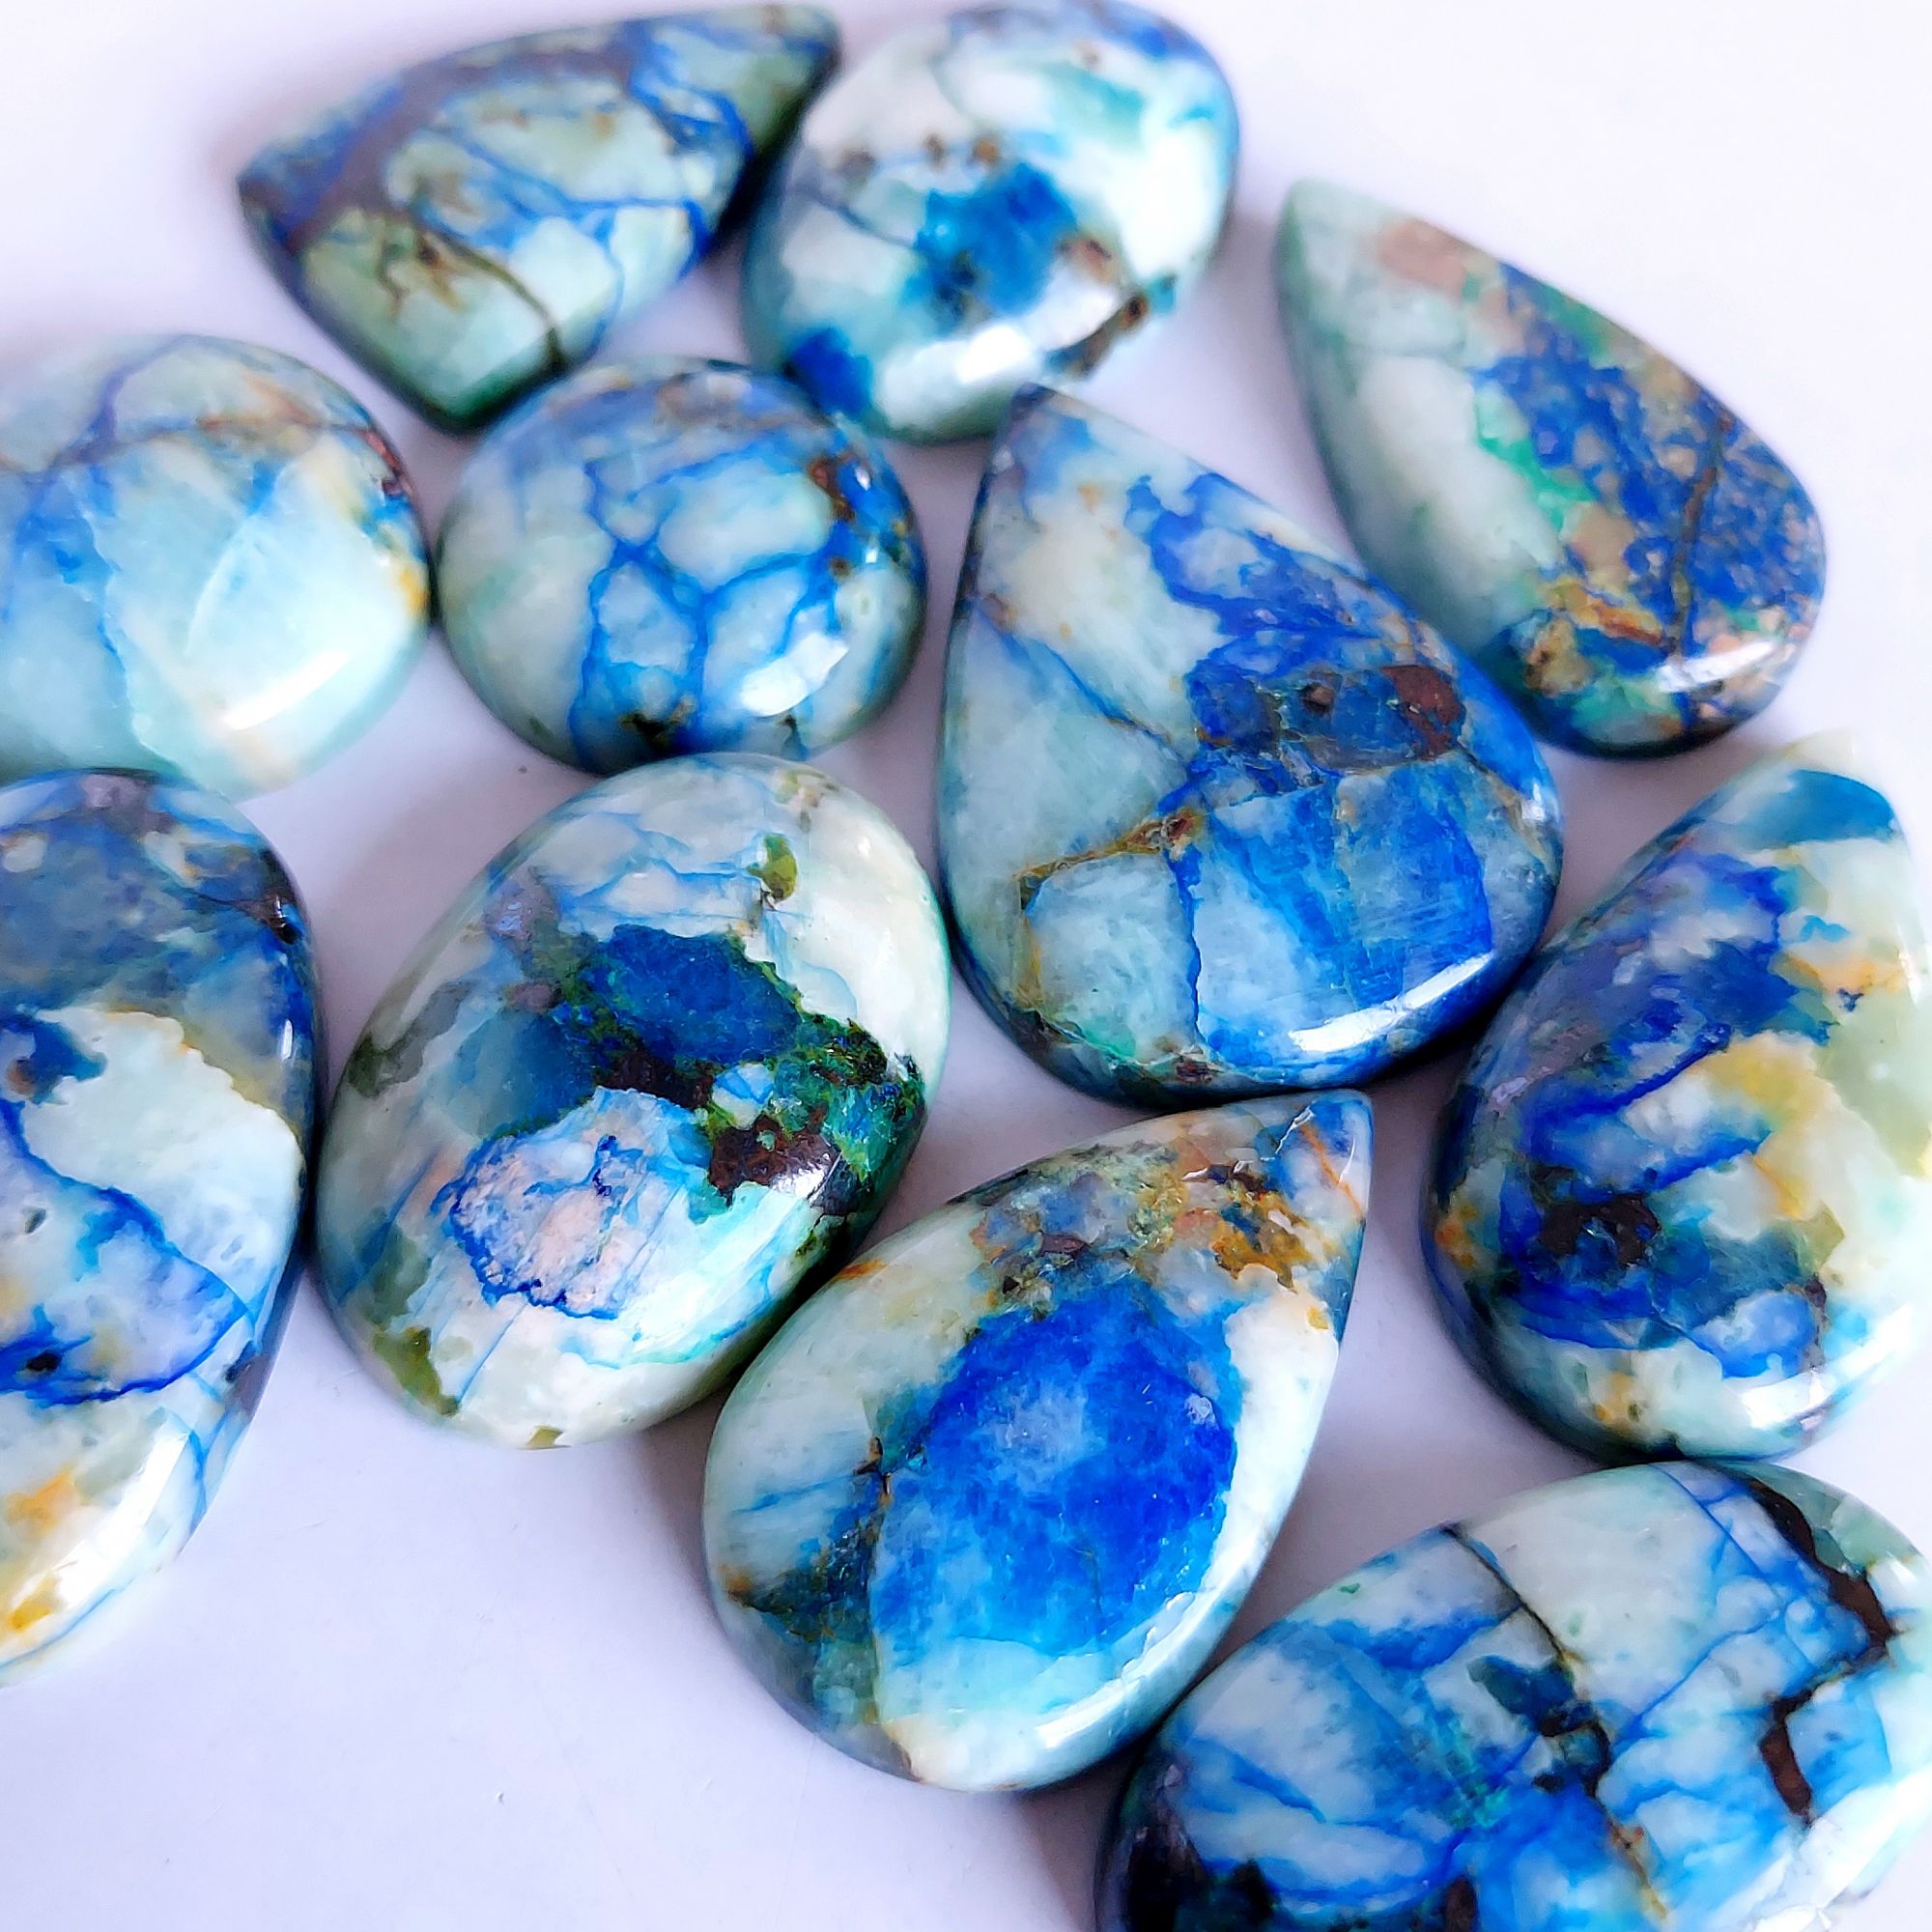 312.Cts 11 Pcs Natural Smooth Azurite Mix Loose Gemstone Cabochon Lot Size 34x24 19x19mm Wholesale Gemstone For jewelry